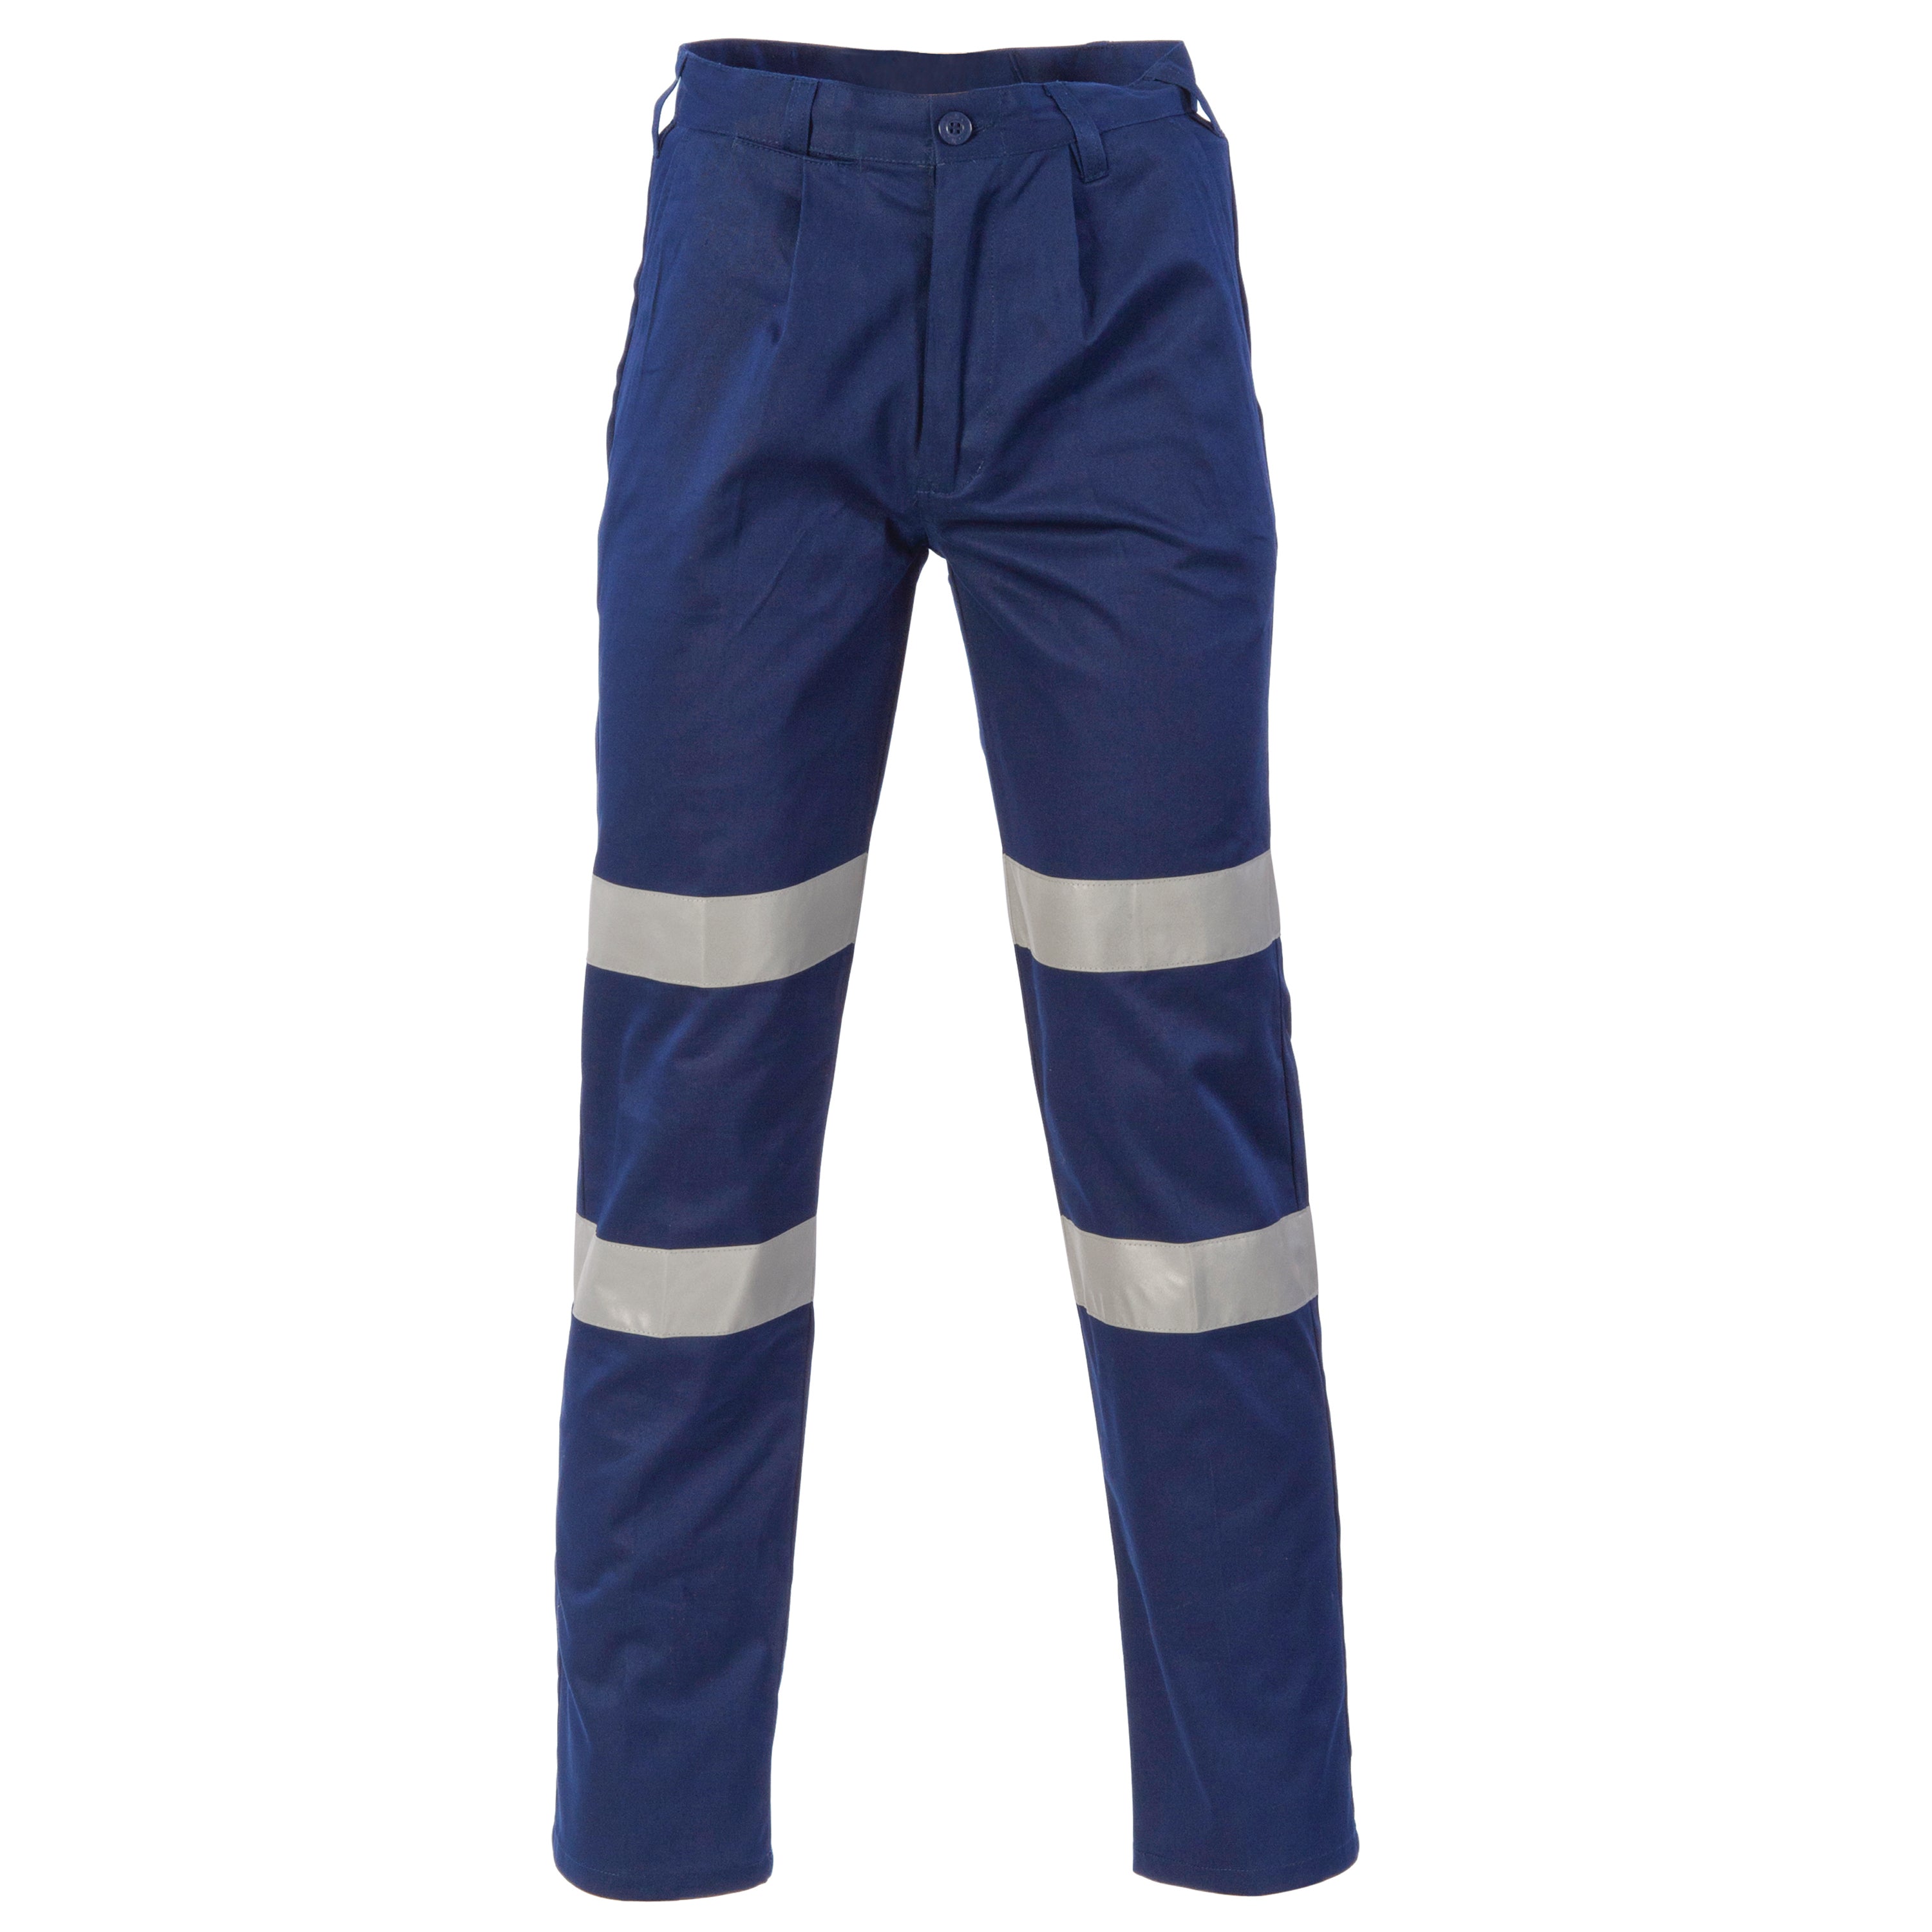 DNC 3354 Middle Weight Double hoops Taped Pants - Navy